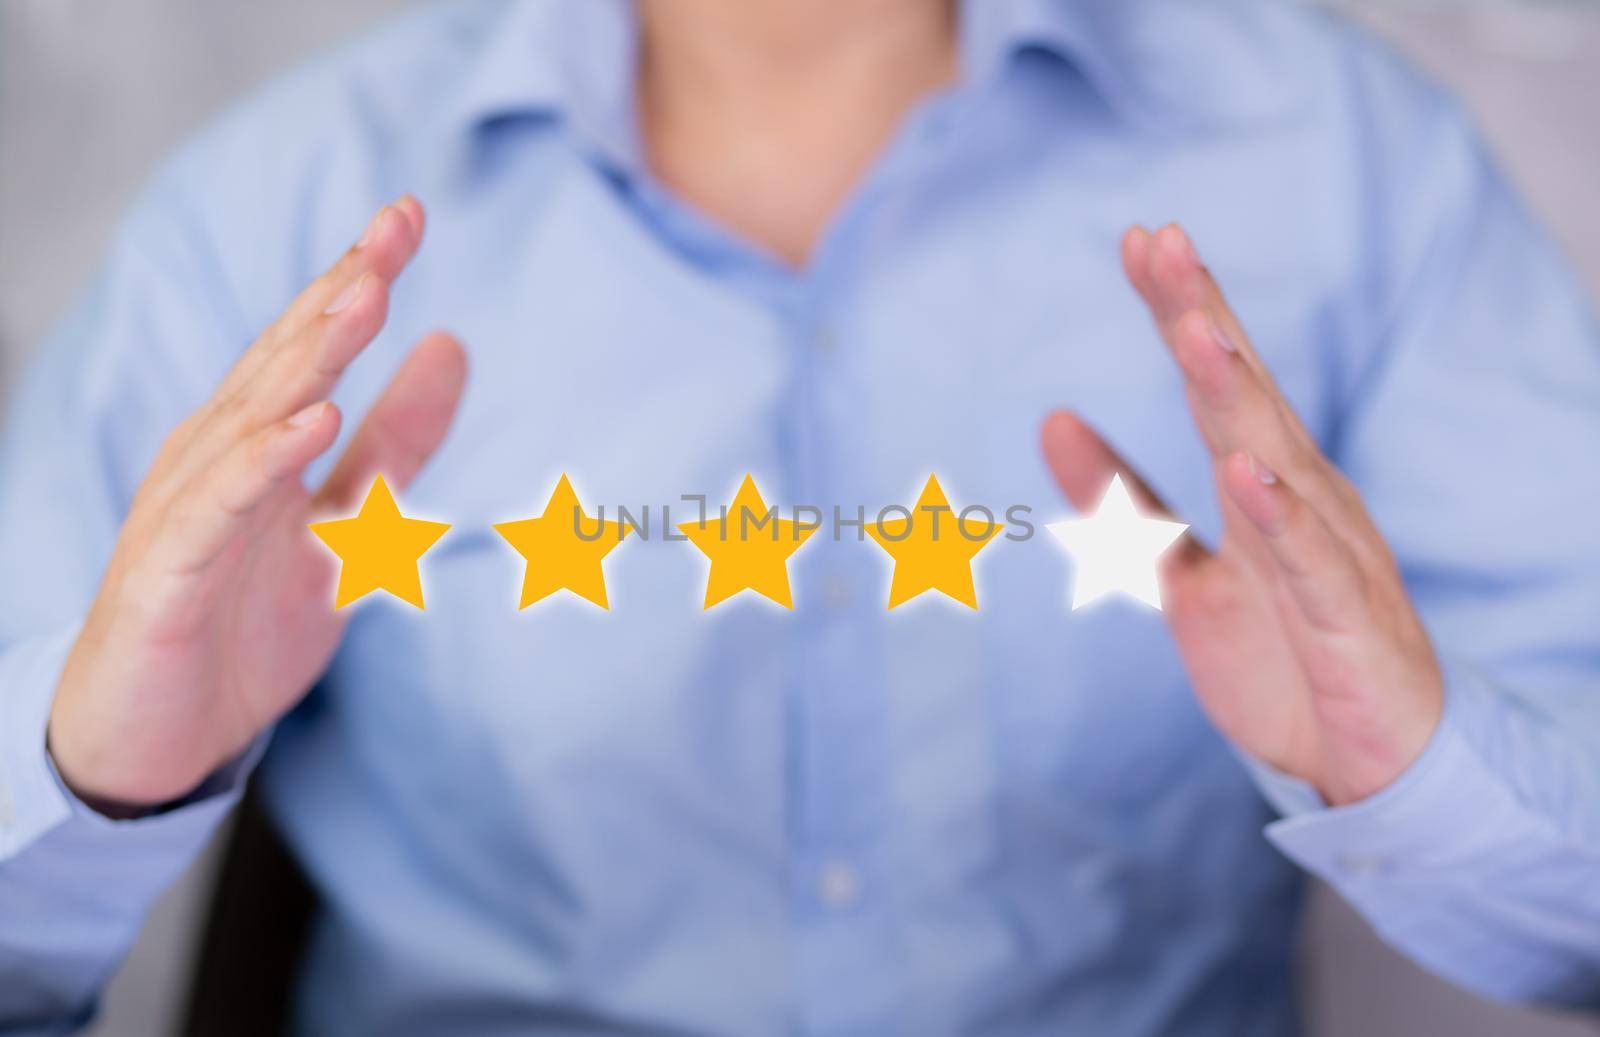 Customer business man holding star icon symbol for vote score review and feedback with quality and satisfaction, success of digital marketing with result excellent for ranking of service.